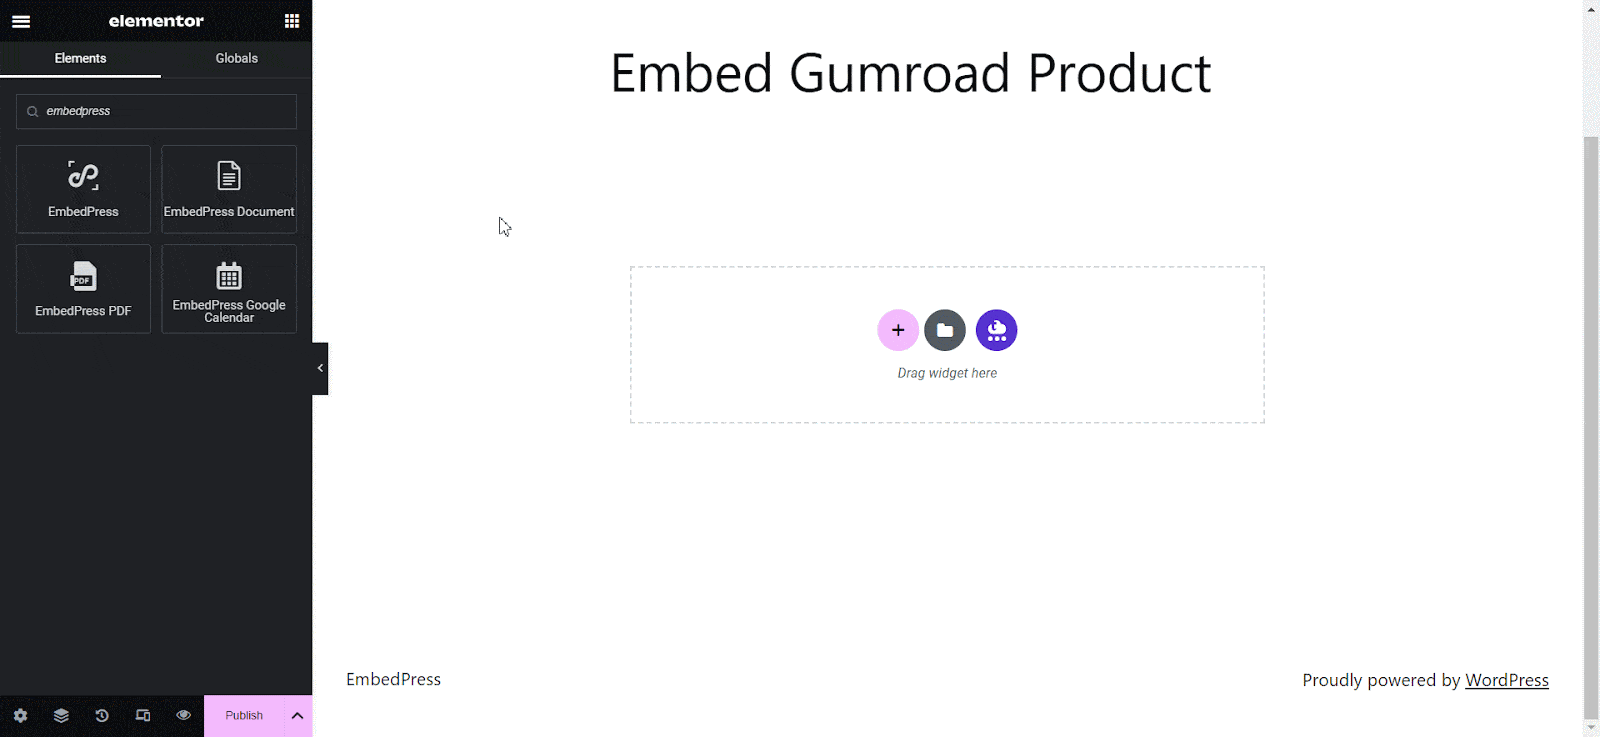 Embed Gumroad Product